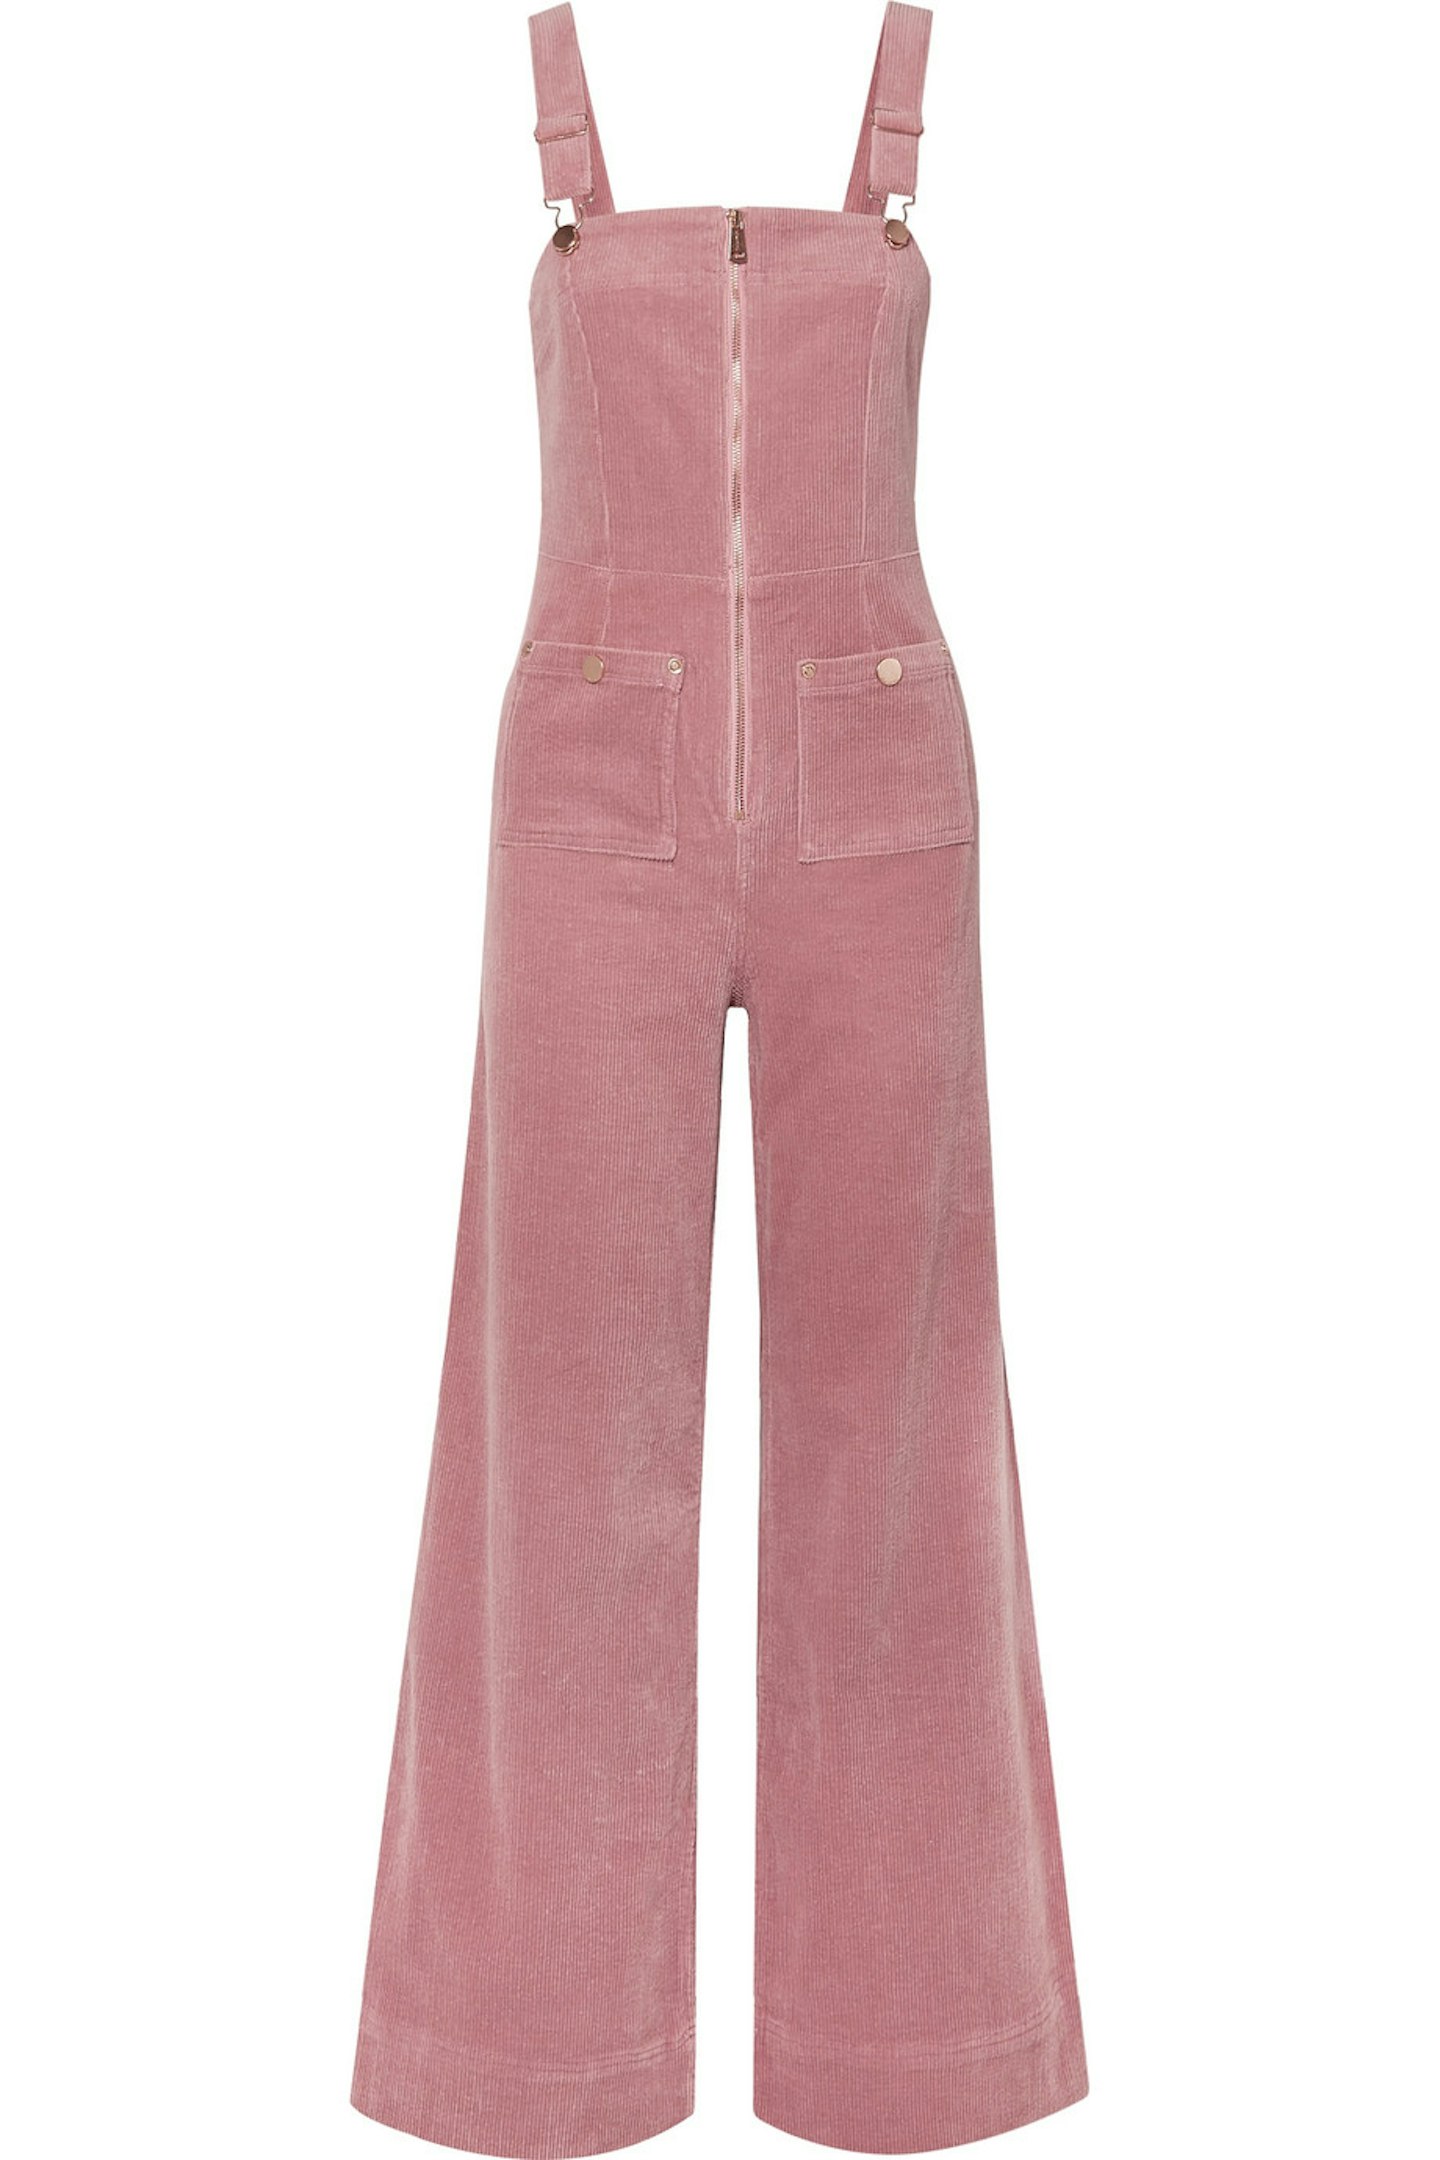 Alice McCall, Quincy Stretch-cotton Corduroy Overalls, £275